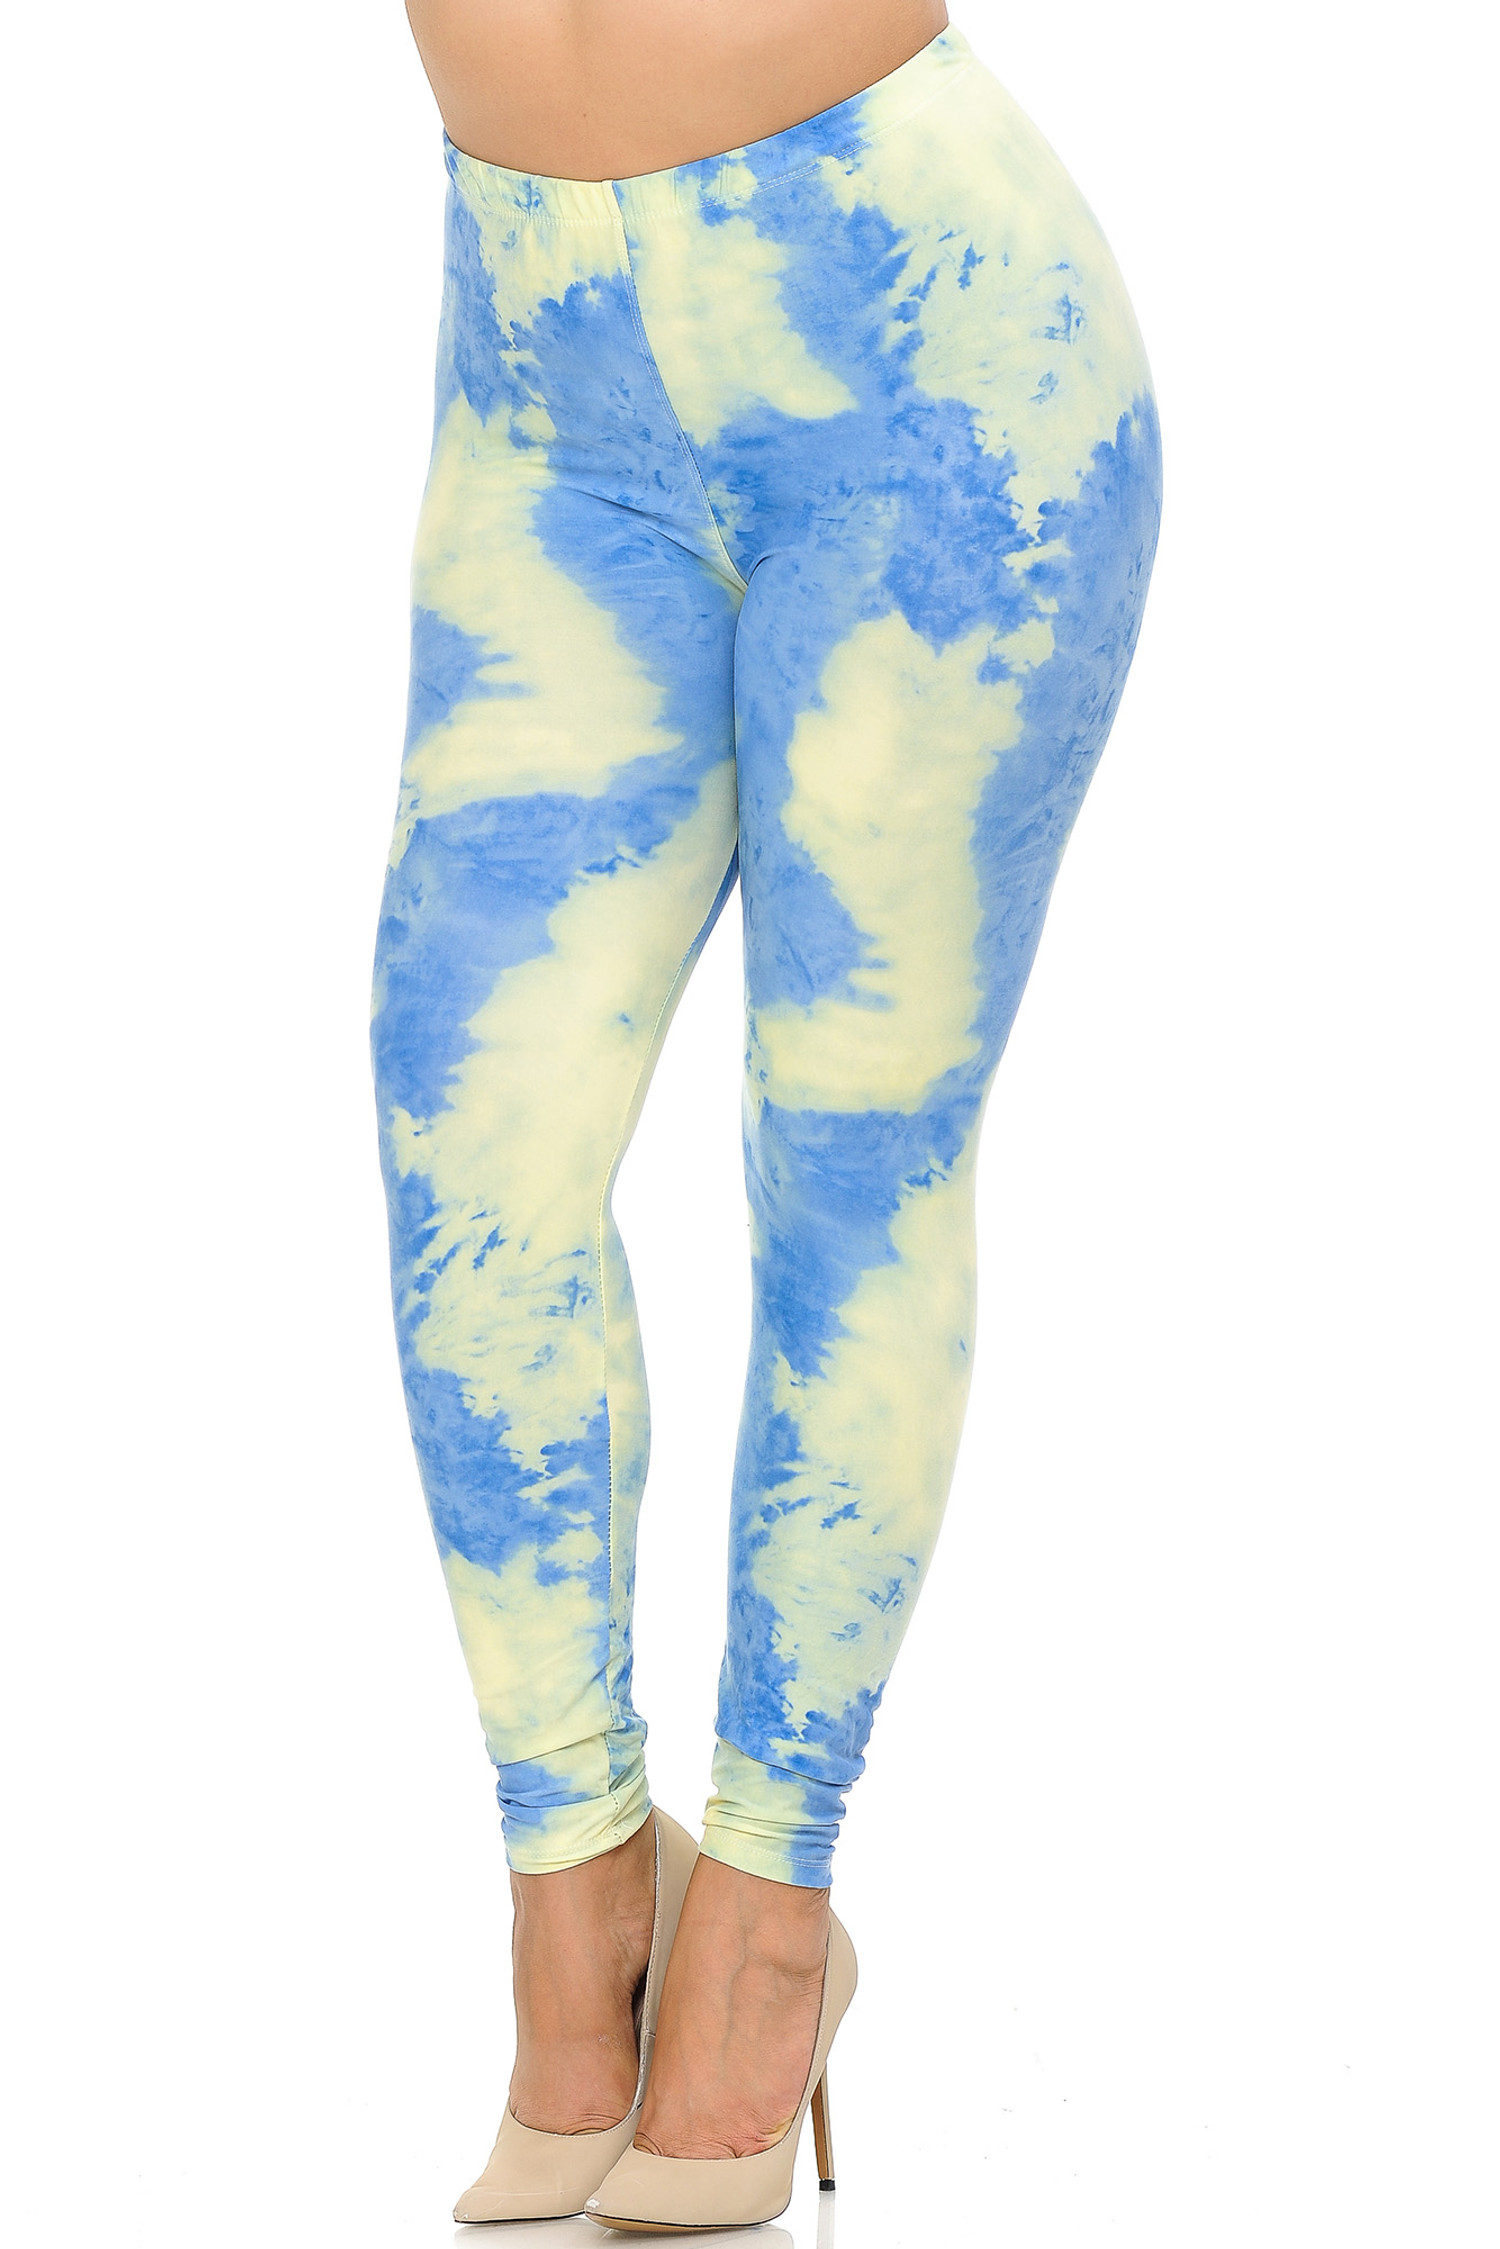 Buttery Smooth Pastel Tie Dye Extra Plus Size Leggings - 3X-5X - EEVEE